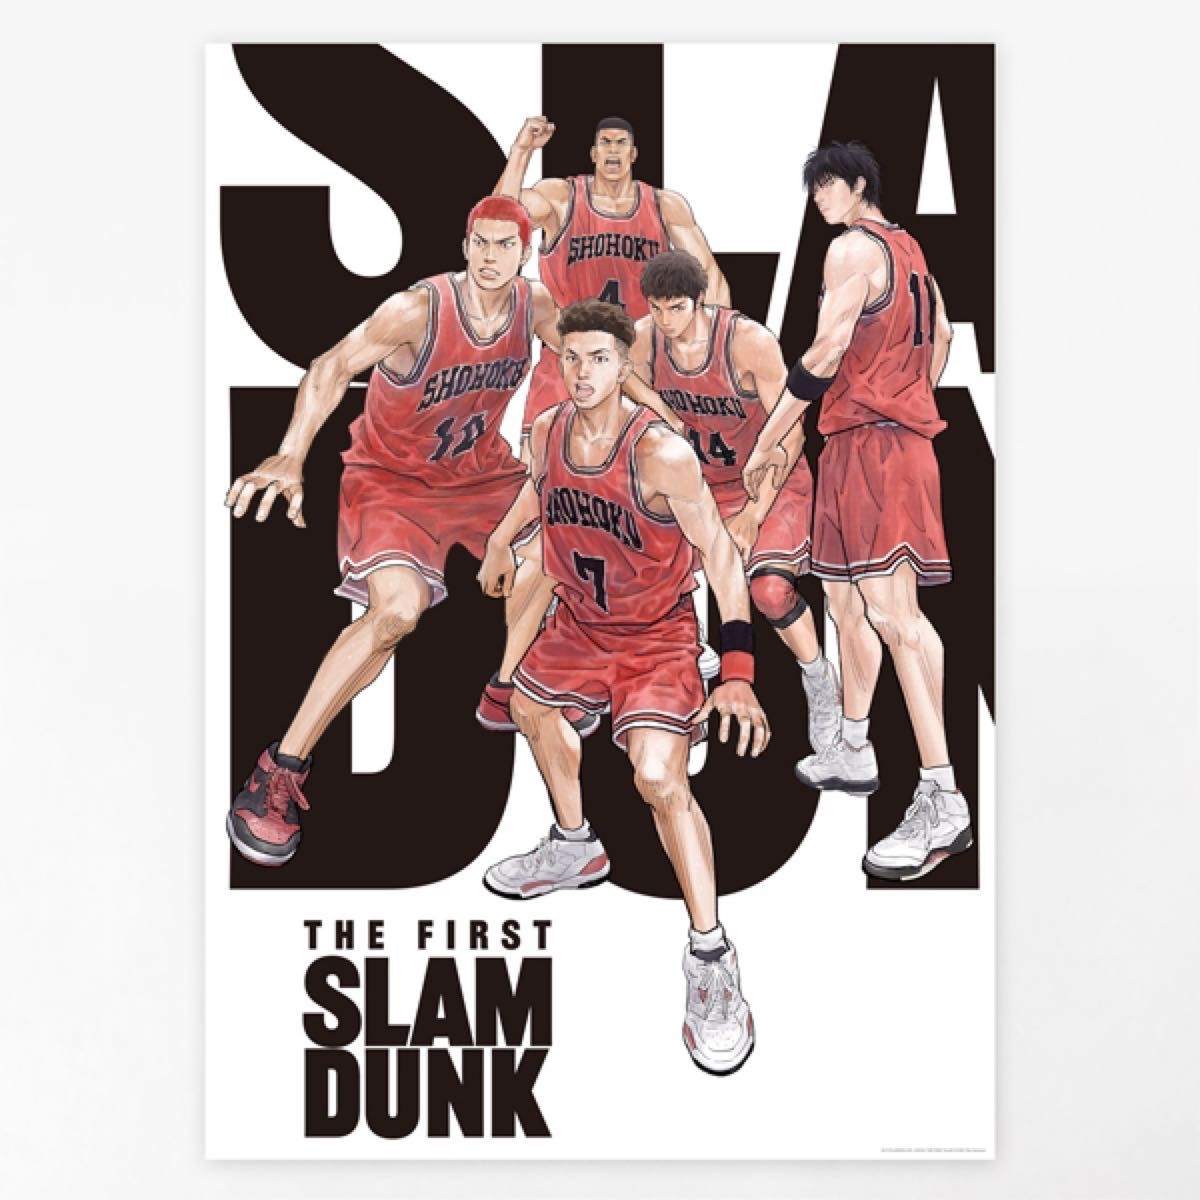 THE FIRST SLAM DUNK缶バッジ 湘北5人セット② 桜木花道 流川楓 宮城リョータ 三井寿 赤木剛憲